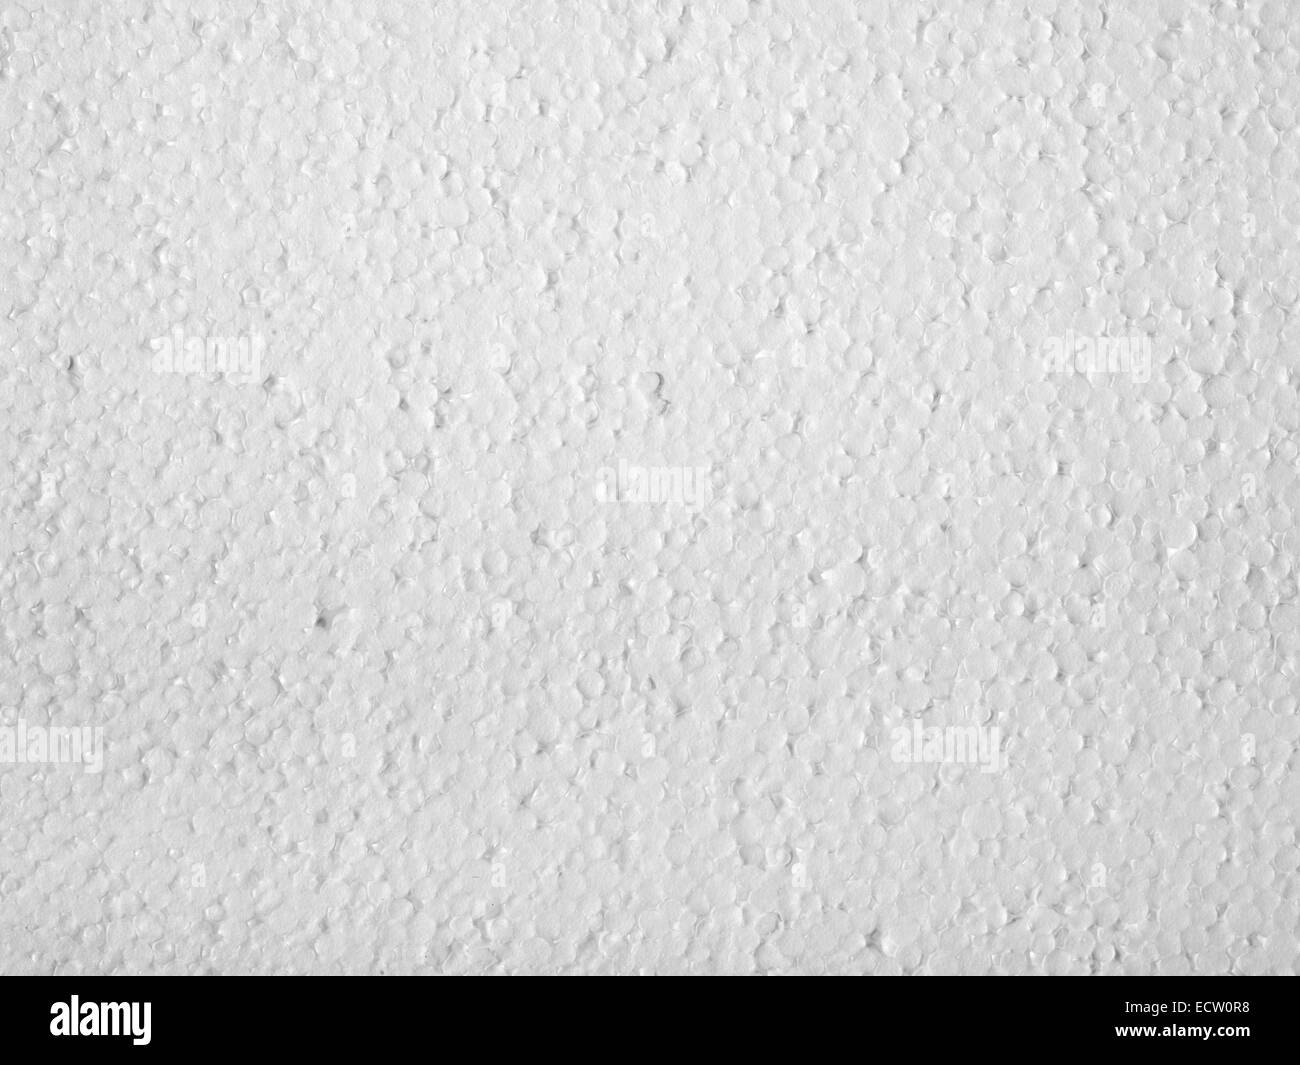 Full frame closeup of a white Polystyrene surface Stock Photo